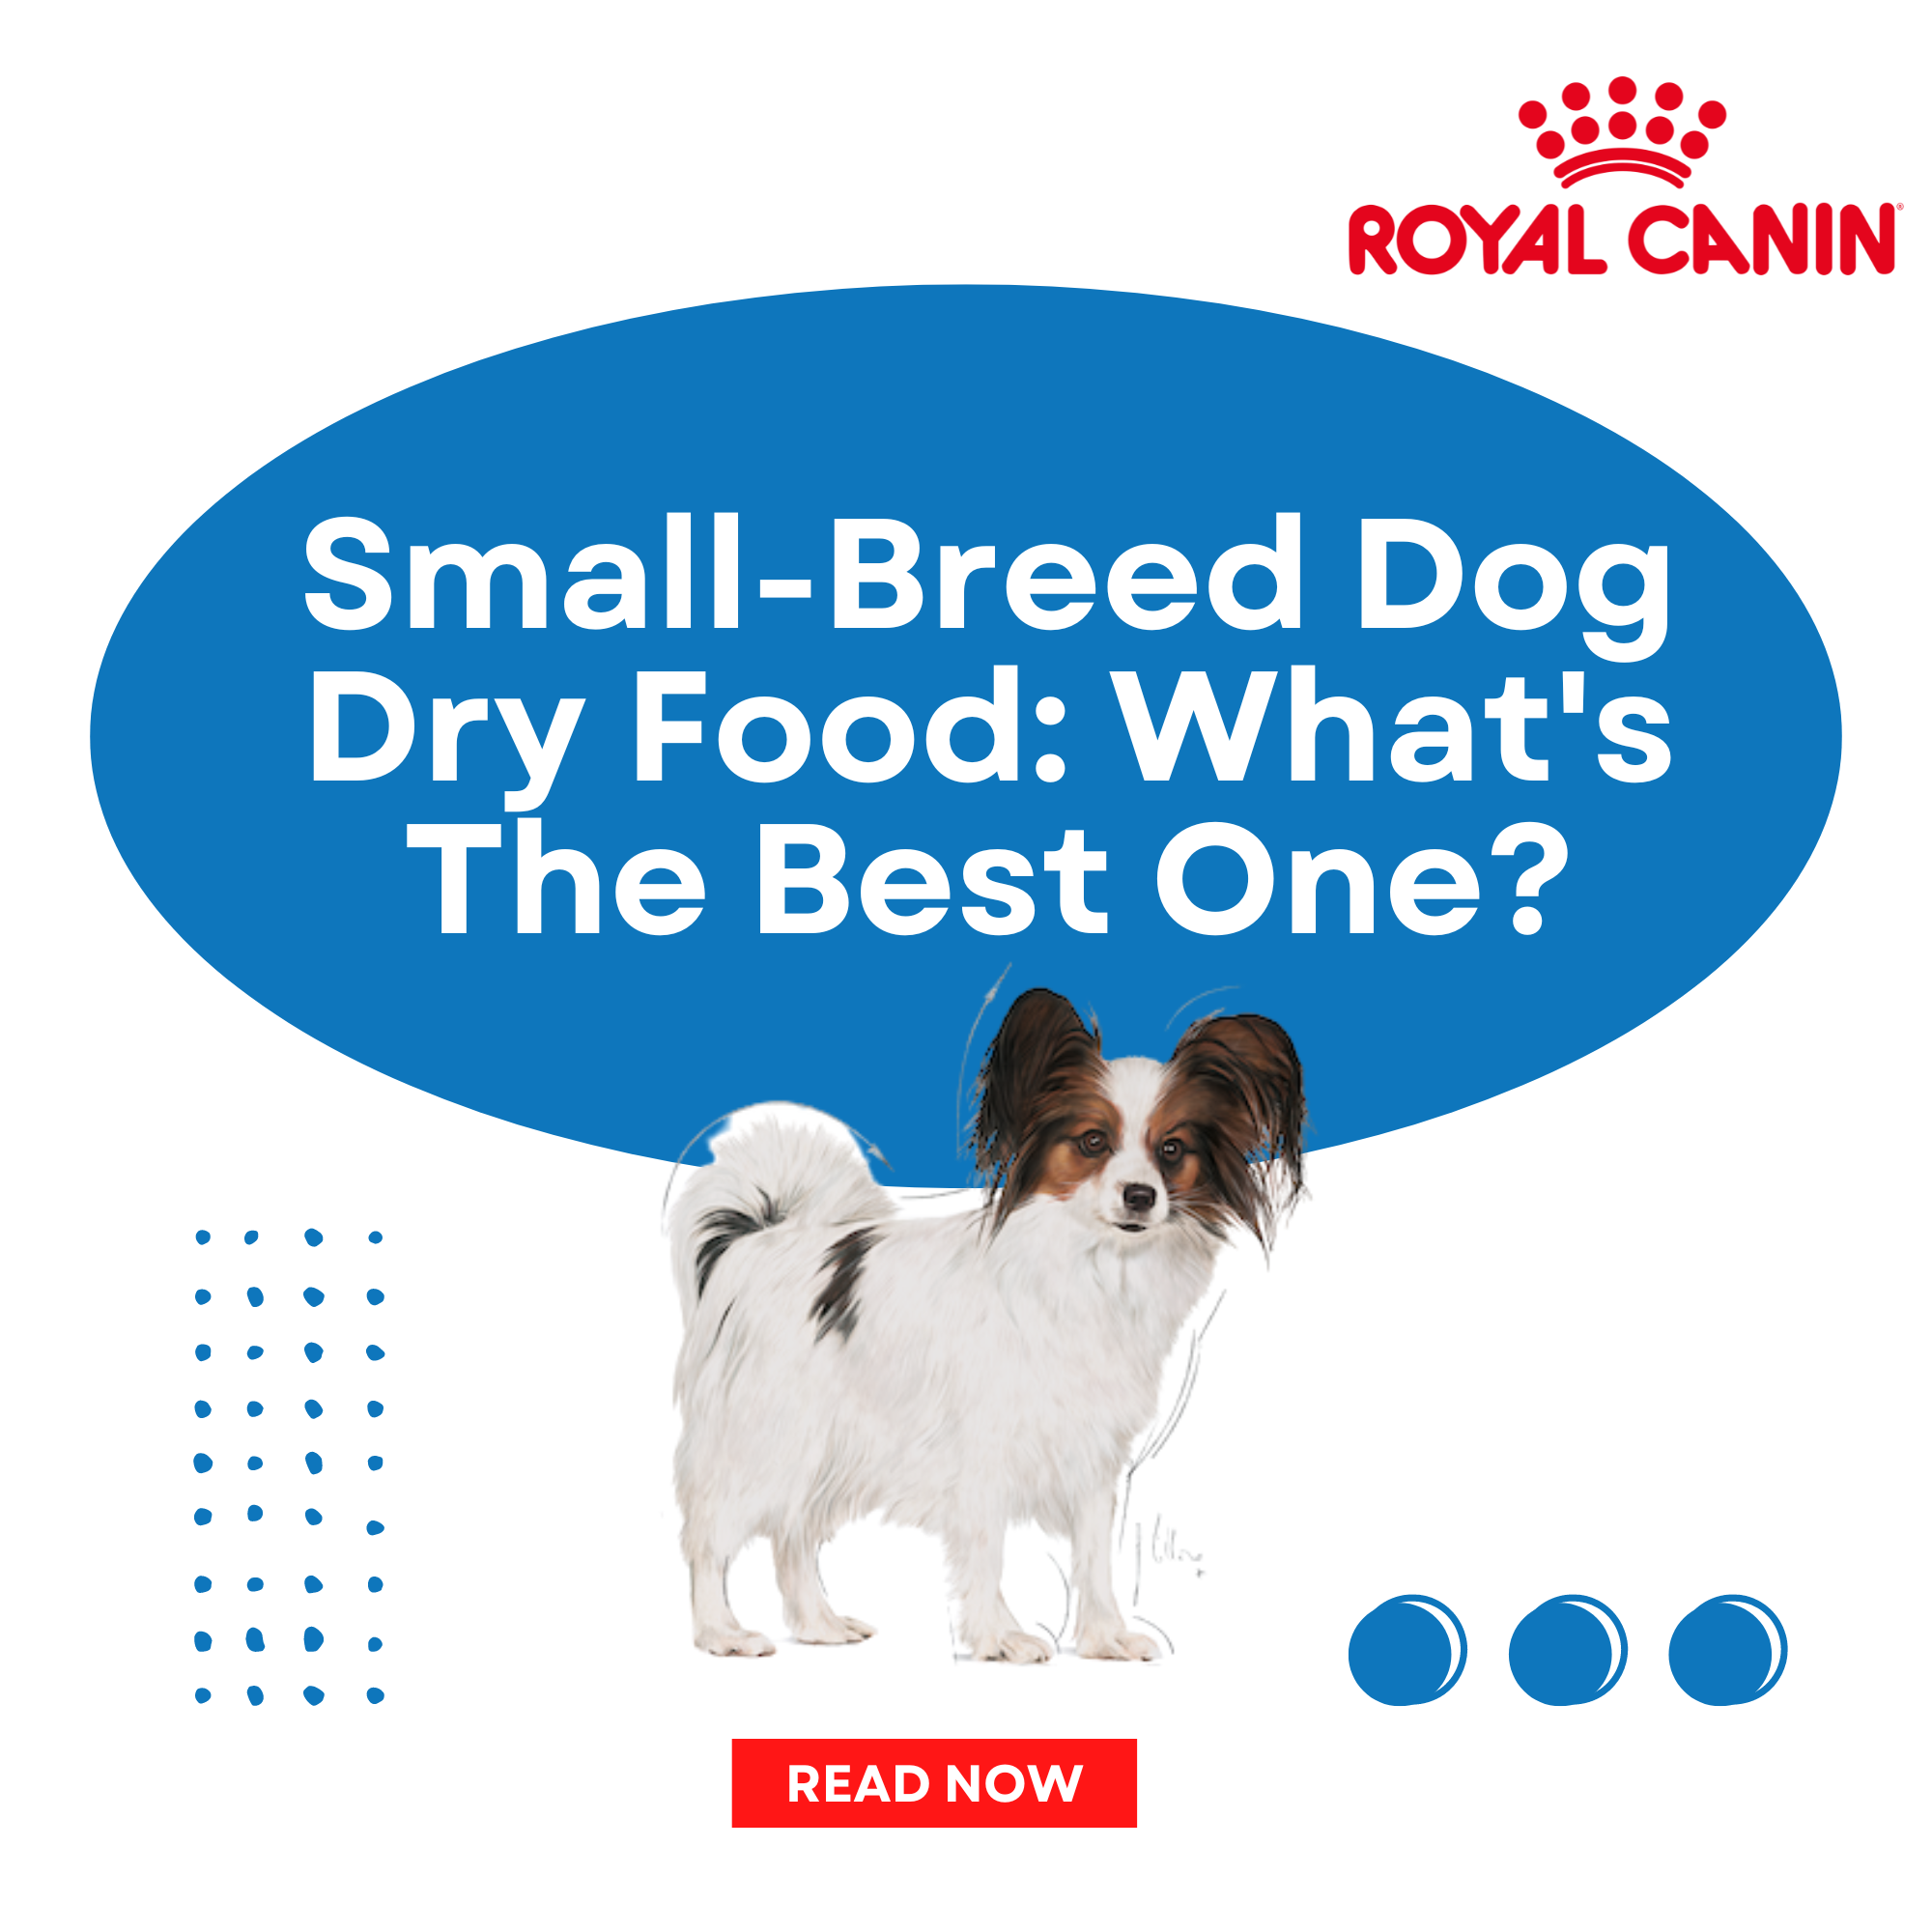 Small-Breed Dog Dry Food: What’s The Best One?